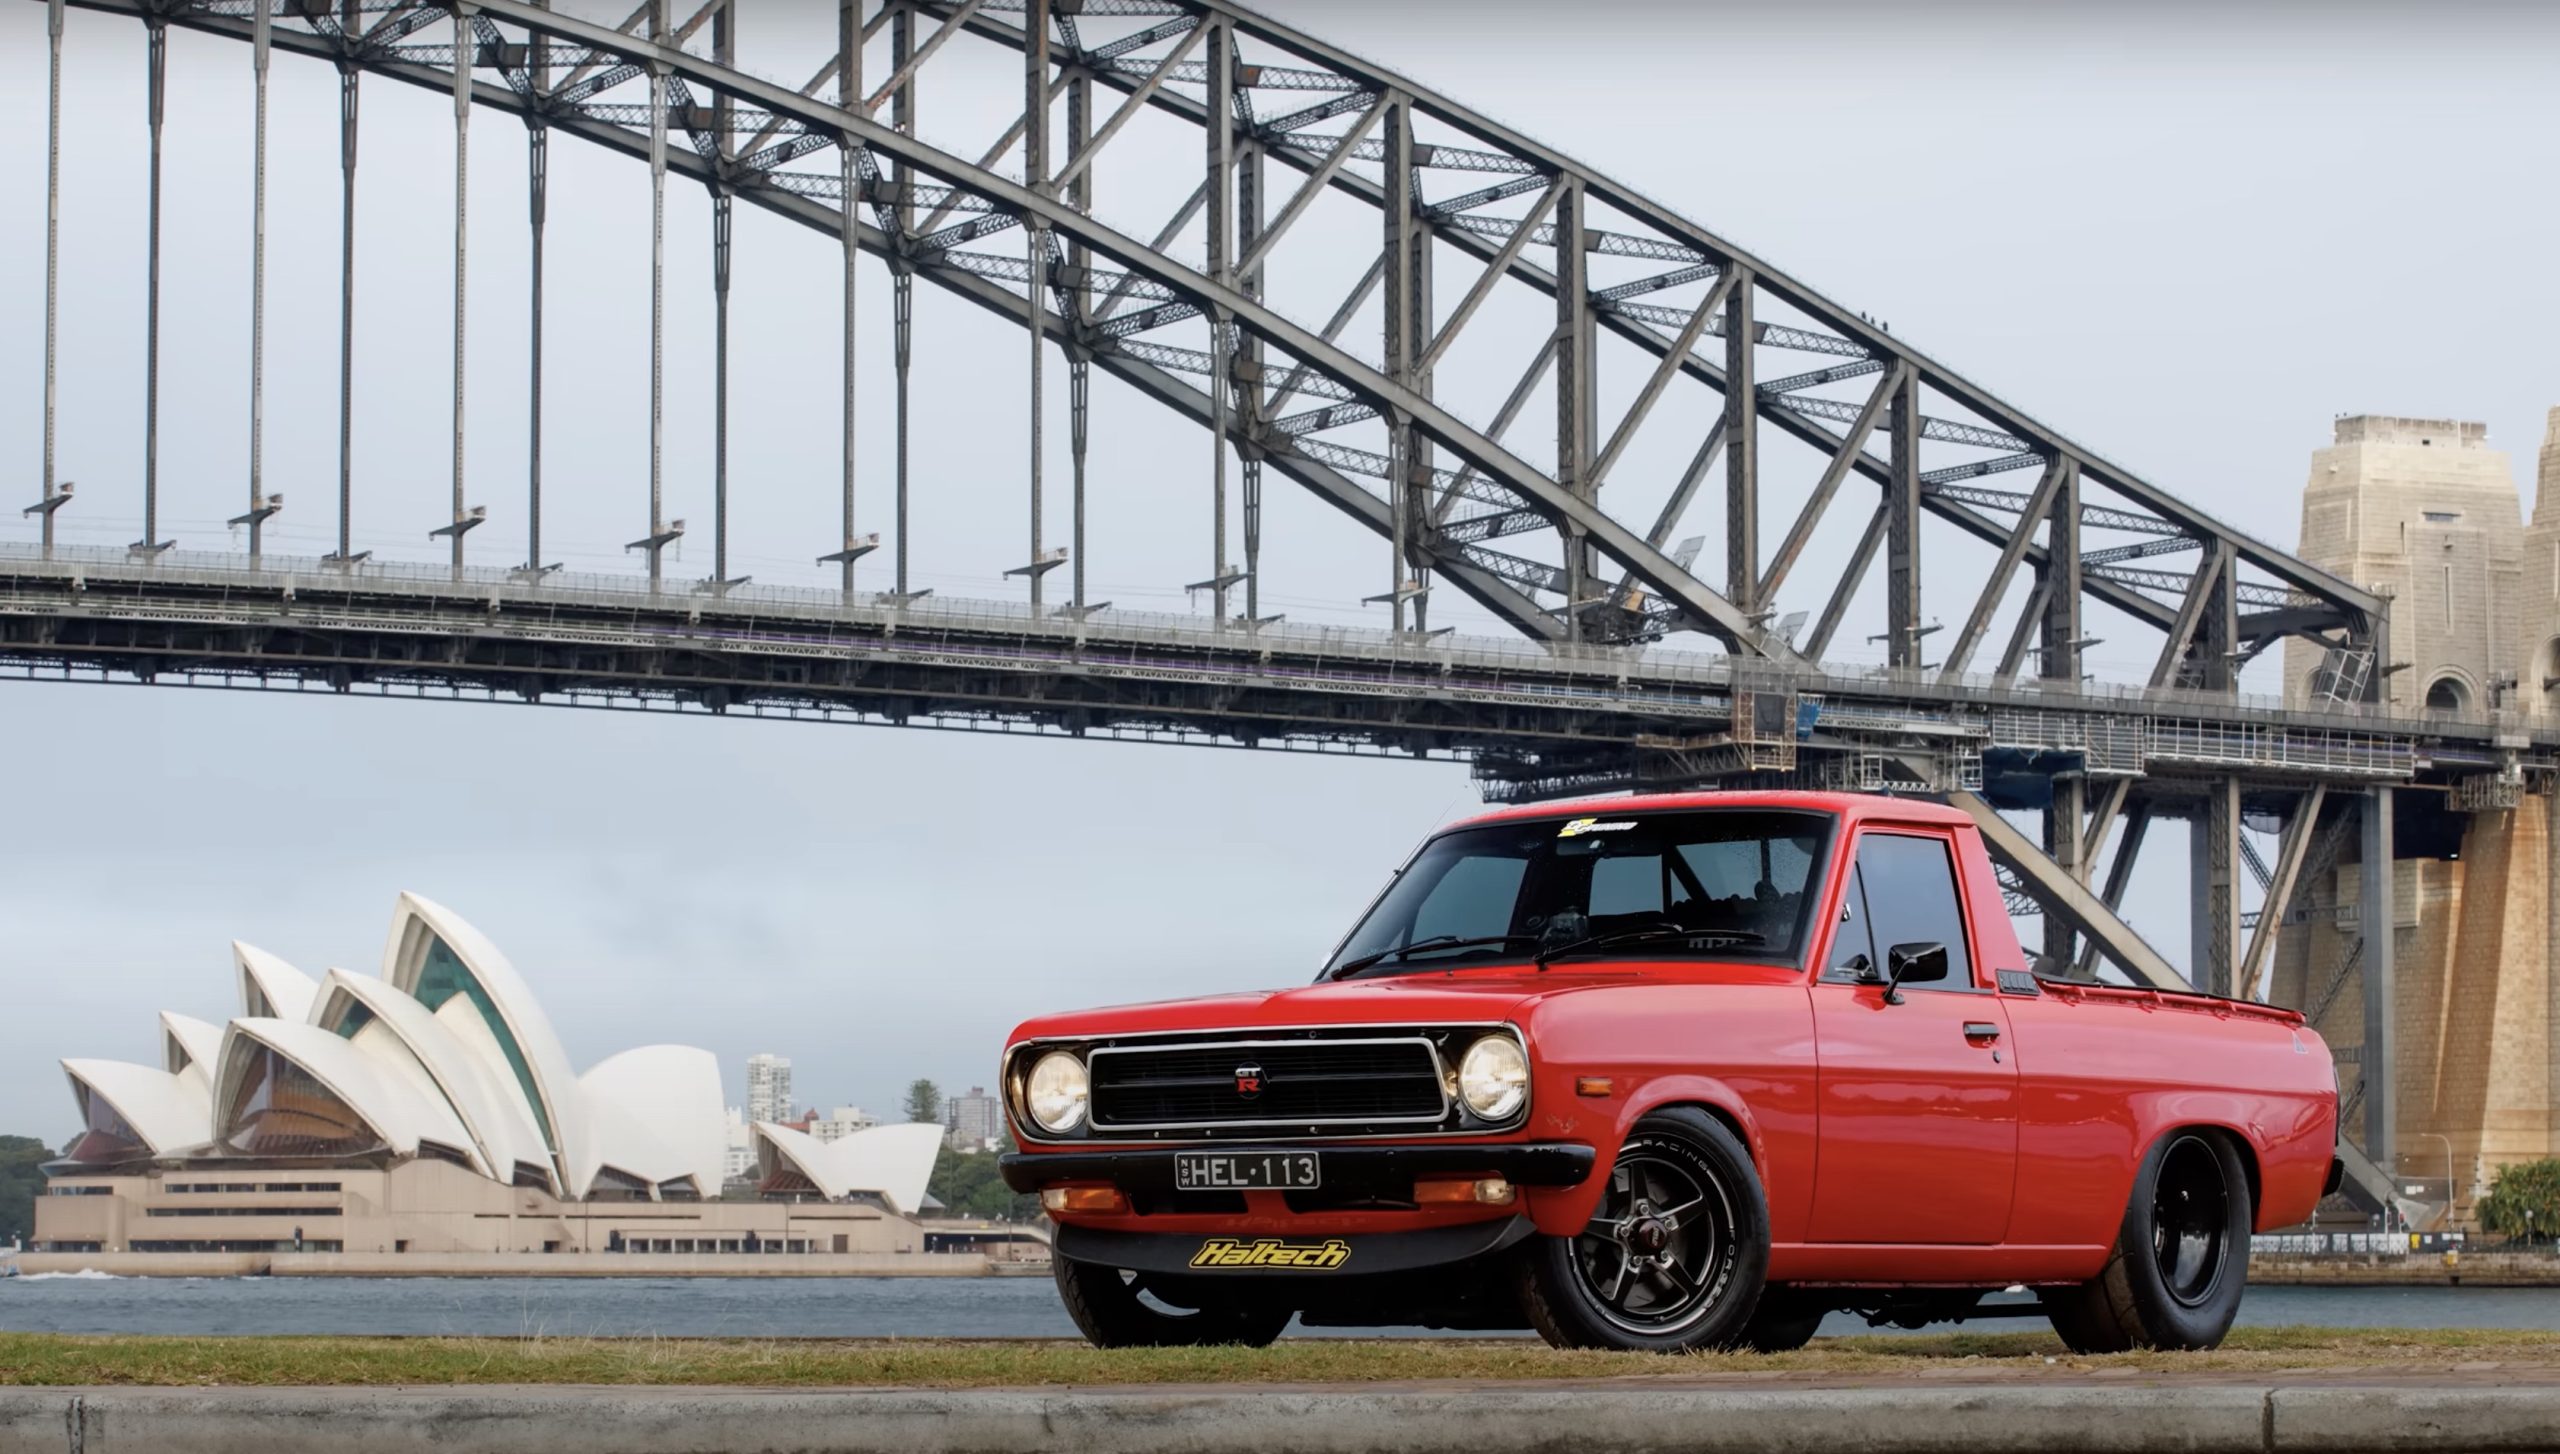 This Datsun Ute is terrifying(ly perfect)